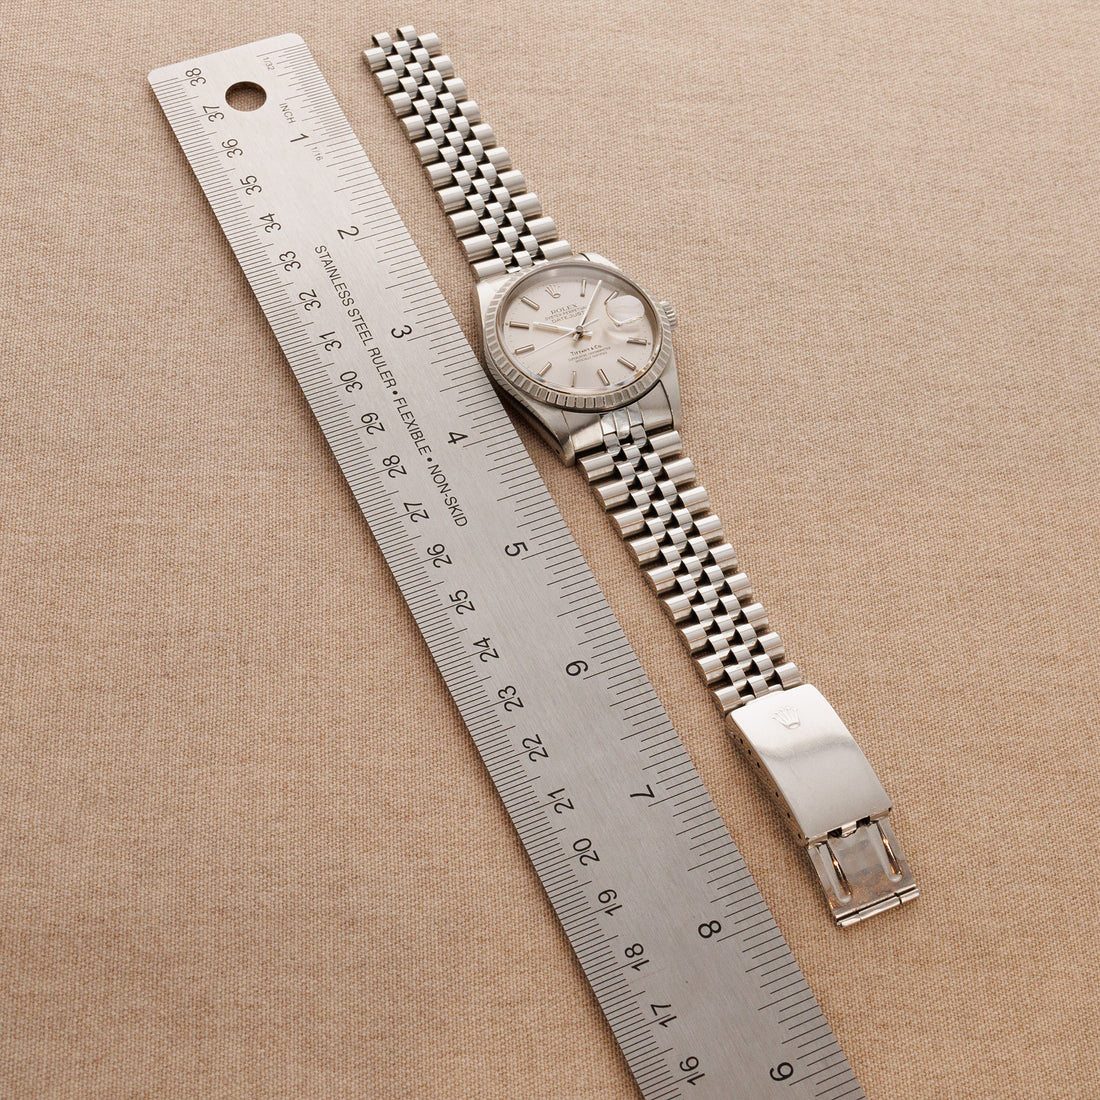 Rolex Steel Datejust Ref. 16220 Retailed by Tiffany & Co.